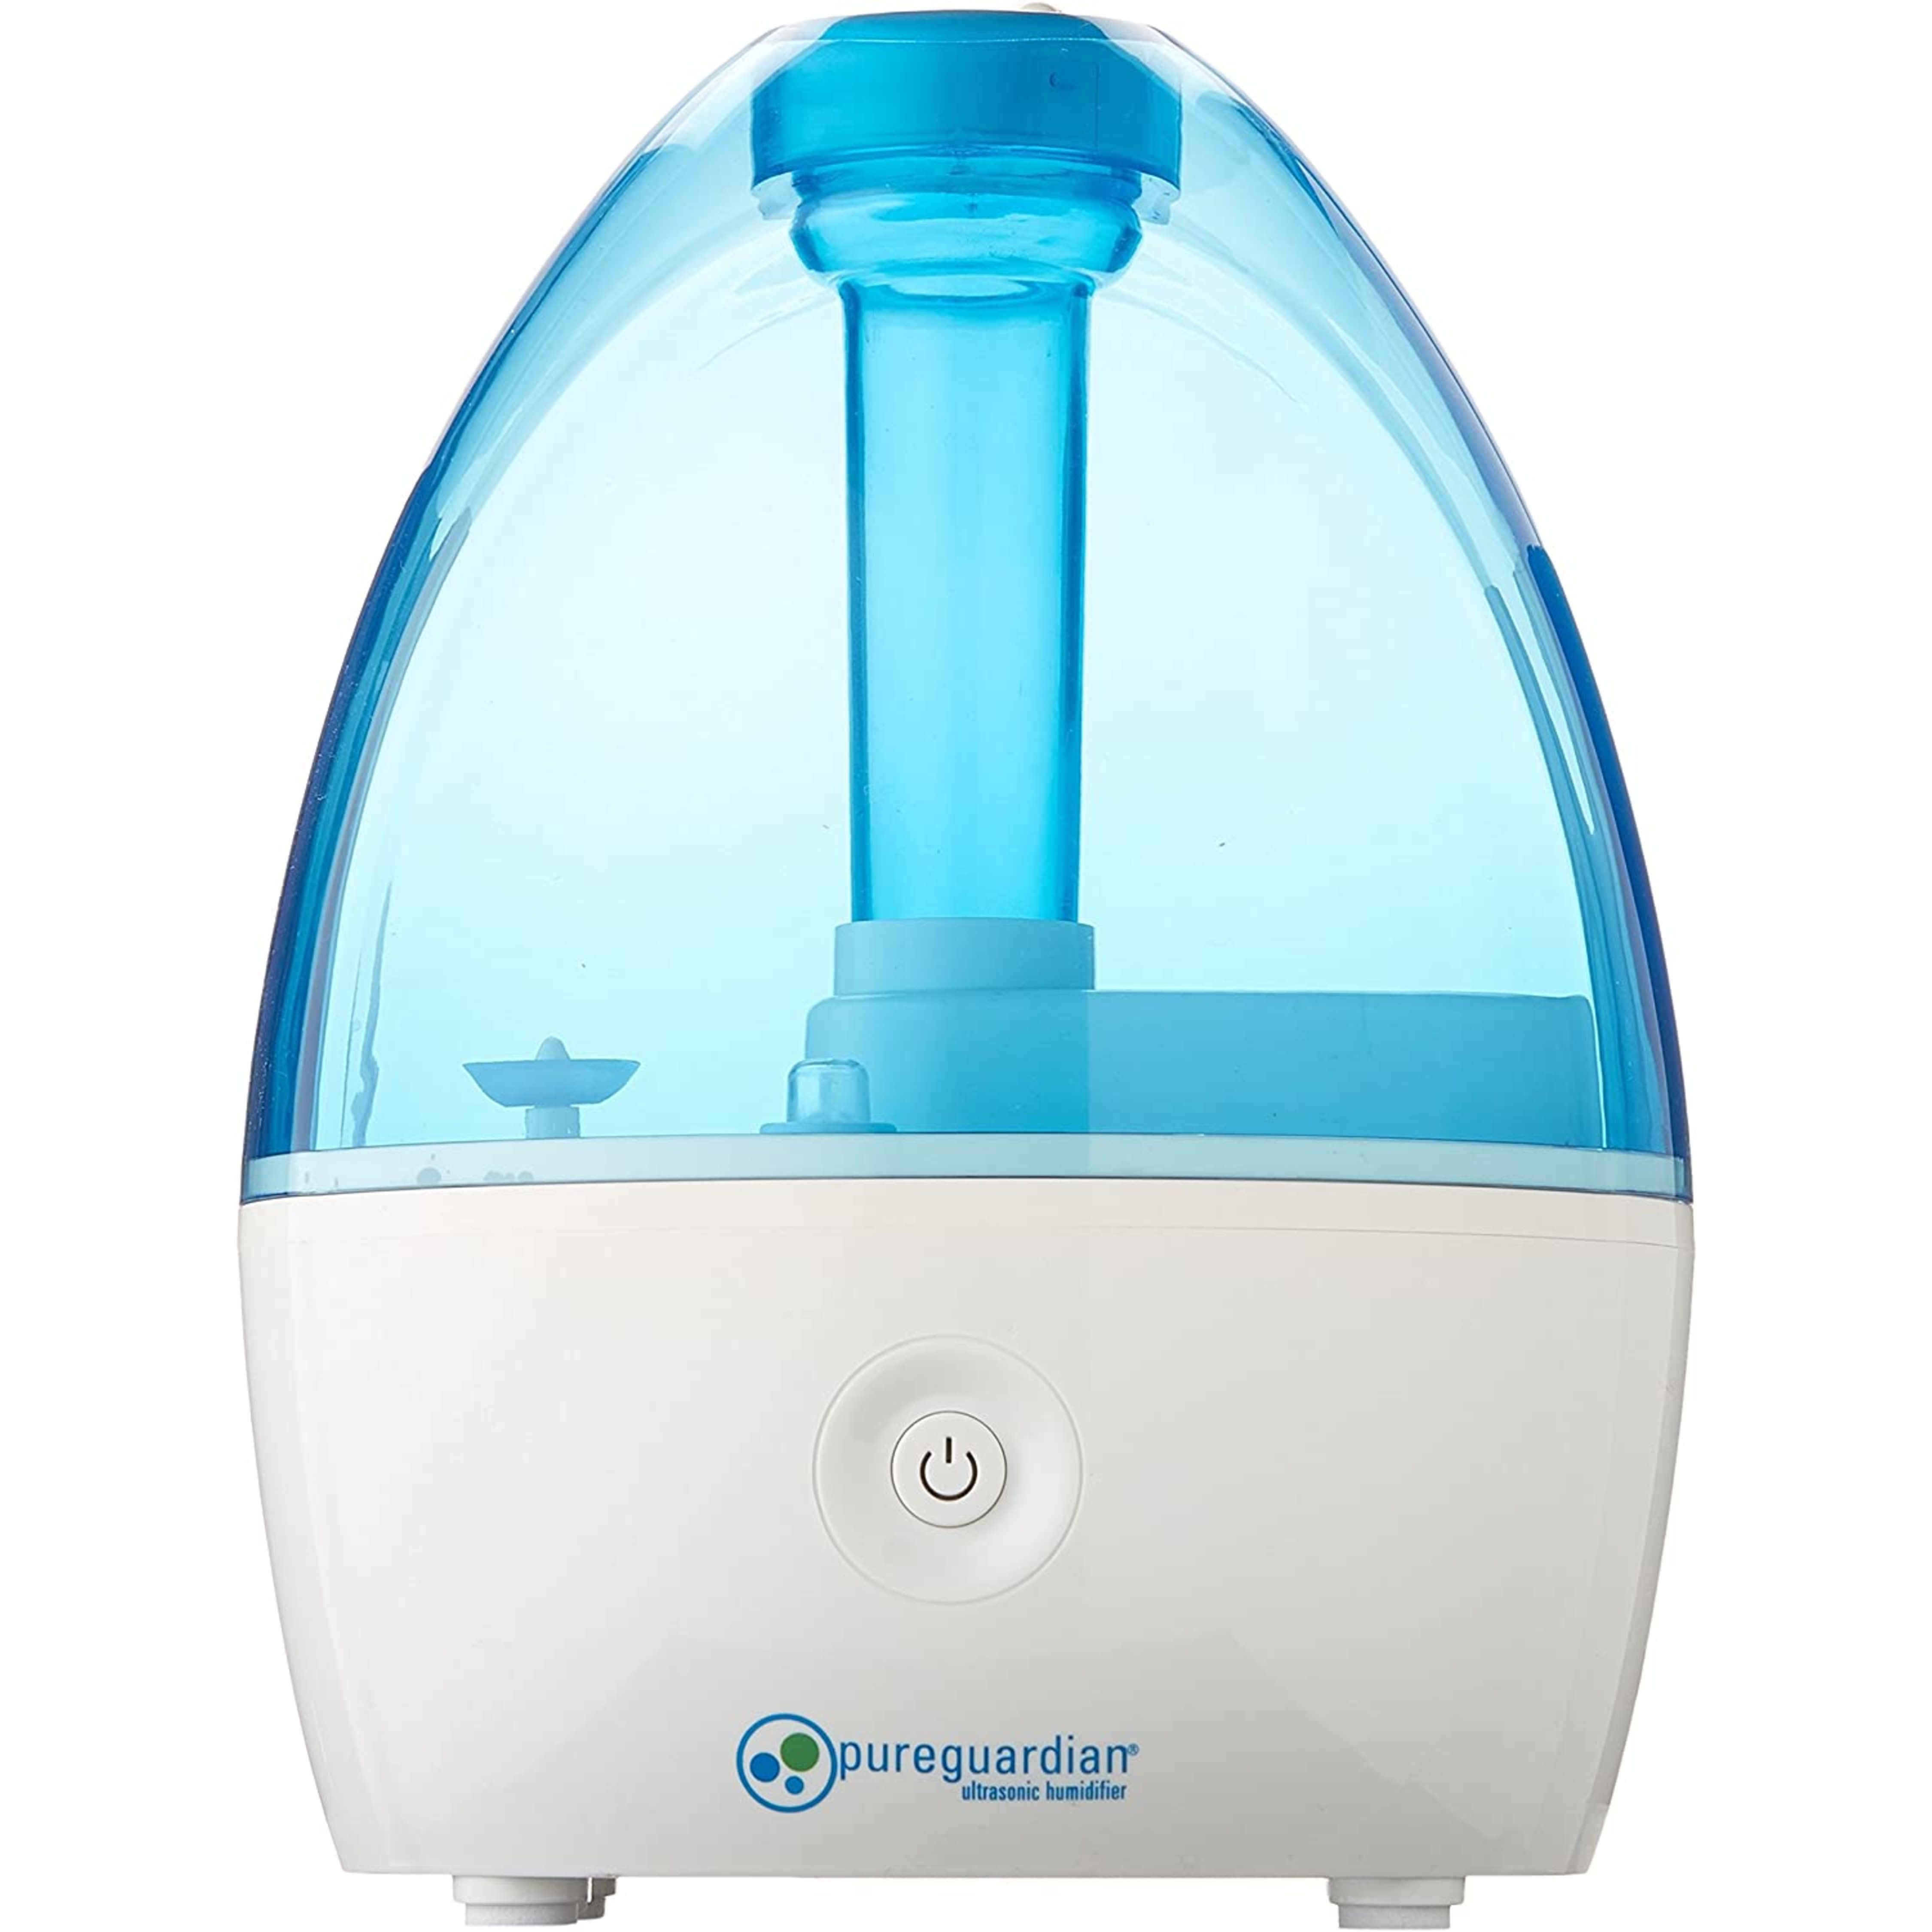 PureGuardian 0.21 Gallon 210 Sq. ft Cool Mist Ultrasonic Humidifier 14-Hour Runtime, H910BL - image 1 of 9